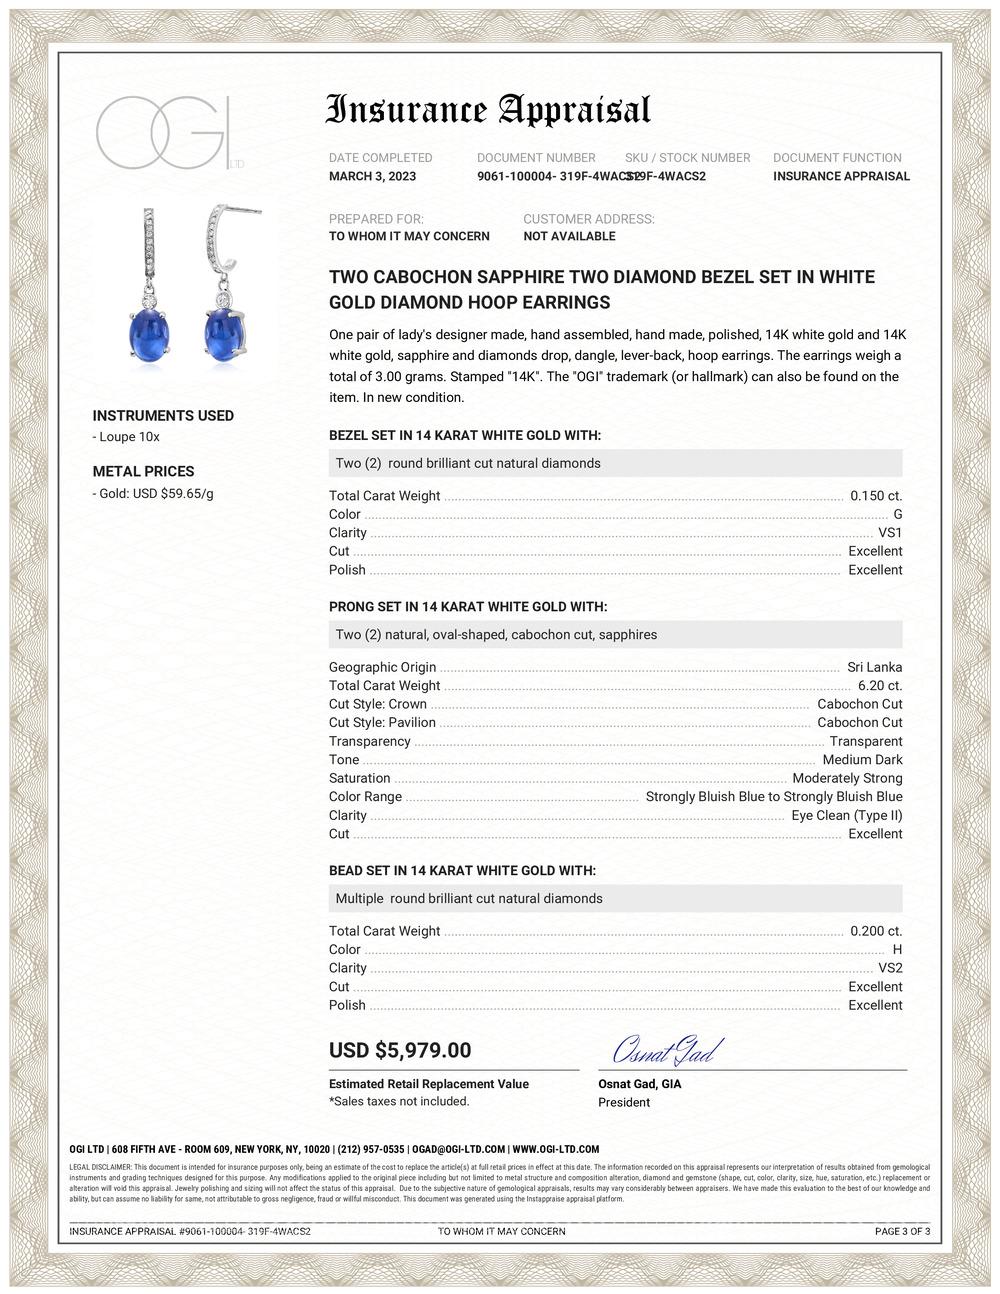 These exquisite hoop earrings are crafted in fourteen karats white gold, showcasing a timeless and elegant design. The focal points of these earrings are the two cushion-oval-shaped cabochon sapphires, each weighing 6.20 carats. These vibrant